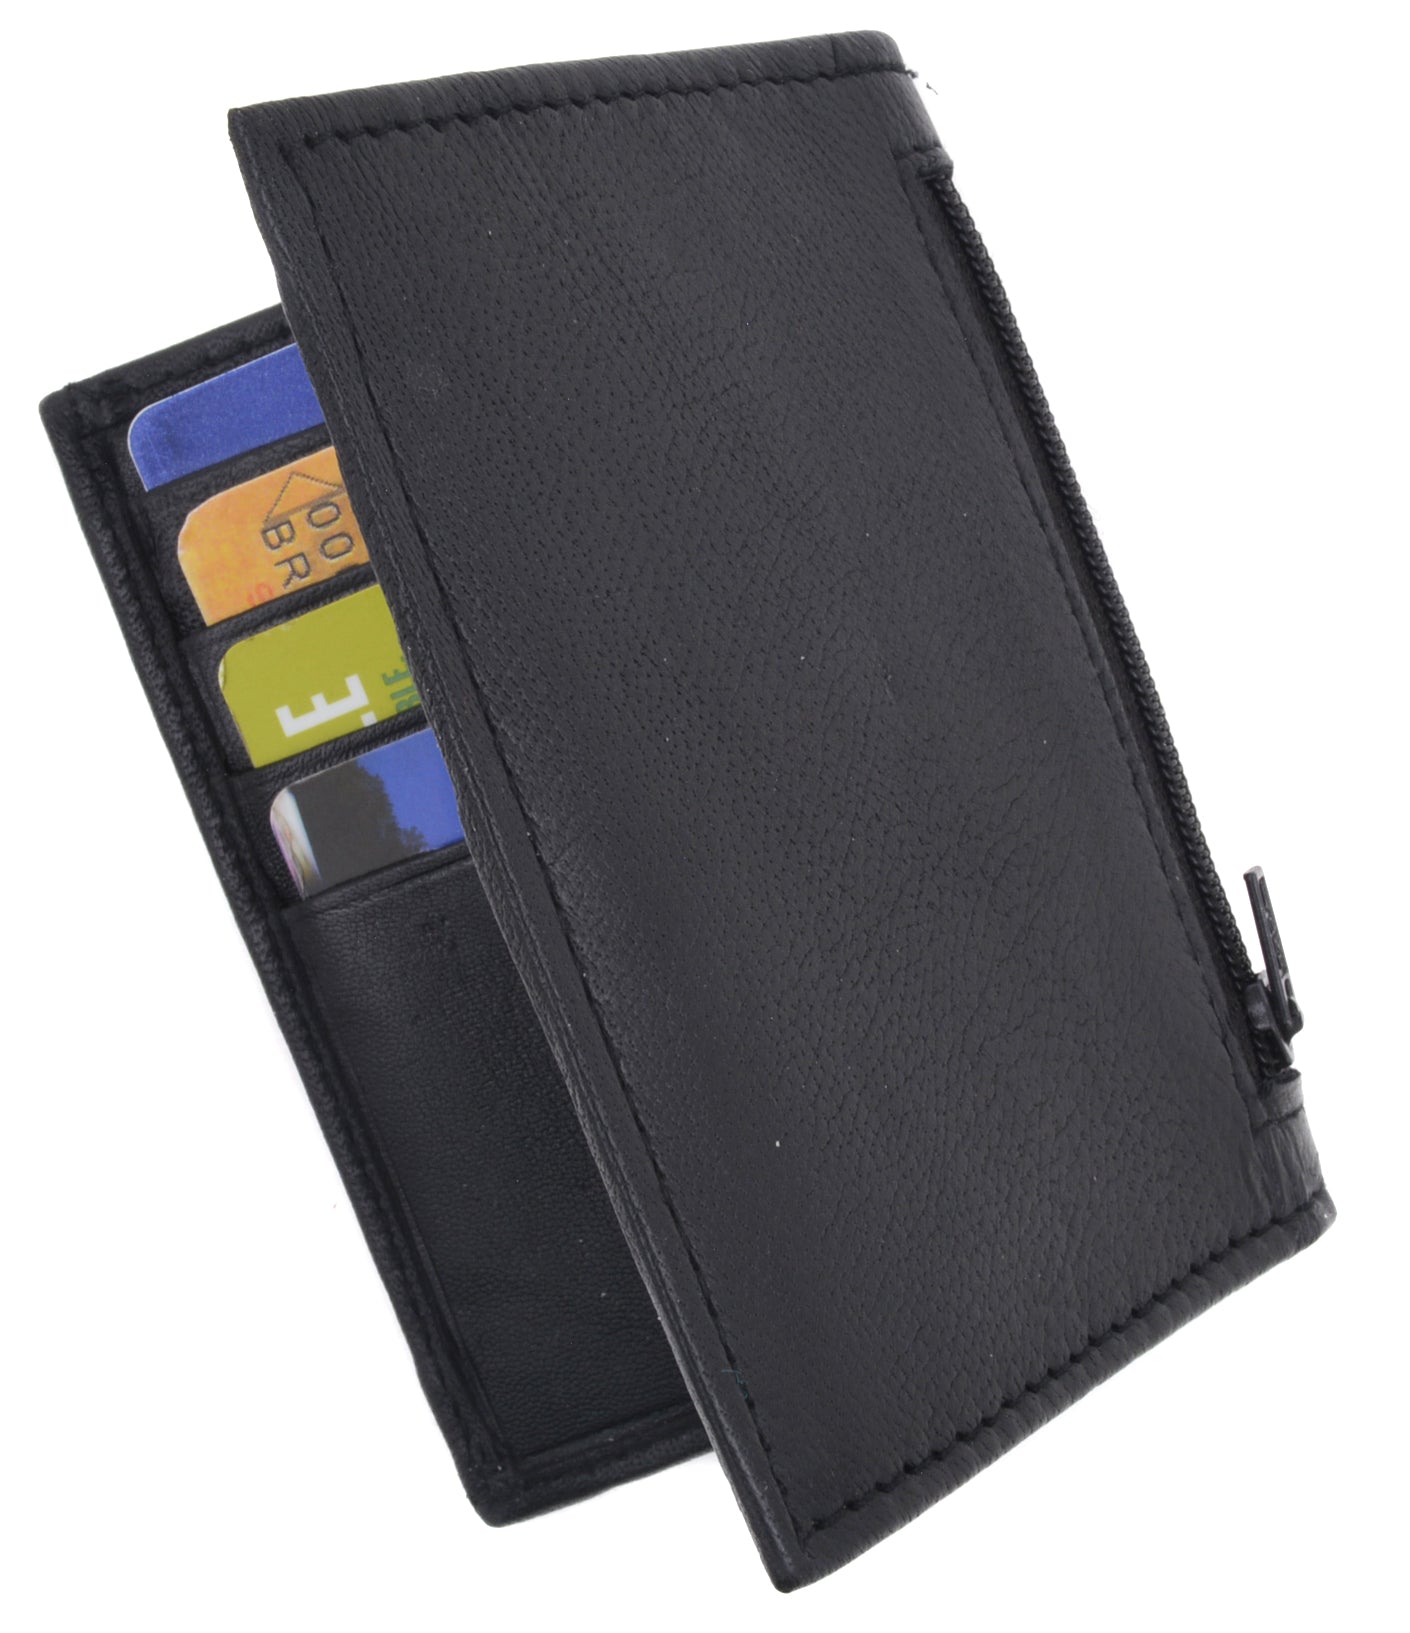 Hydestyle Genuine Leather Credit Card Holder Wallet For 34 Cards with Plastic Sleeves #GW701